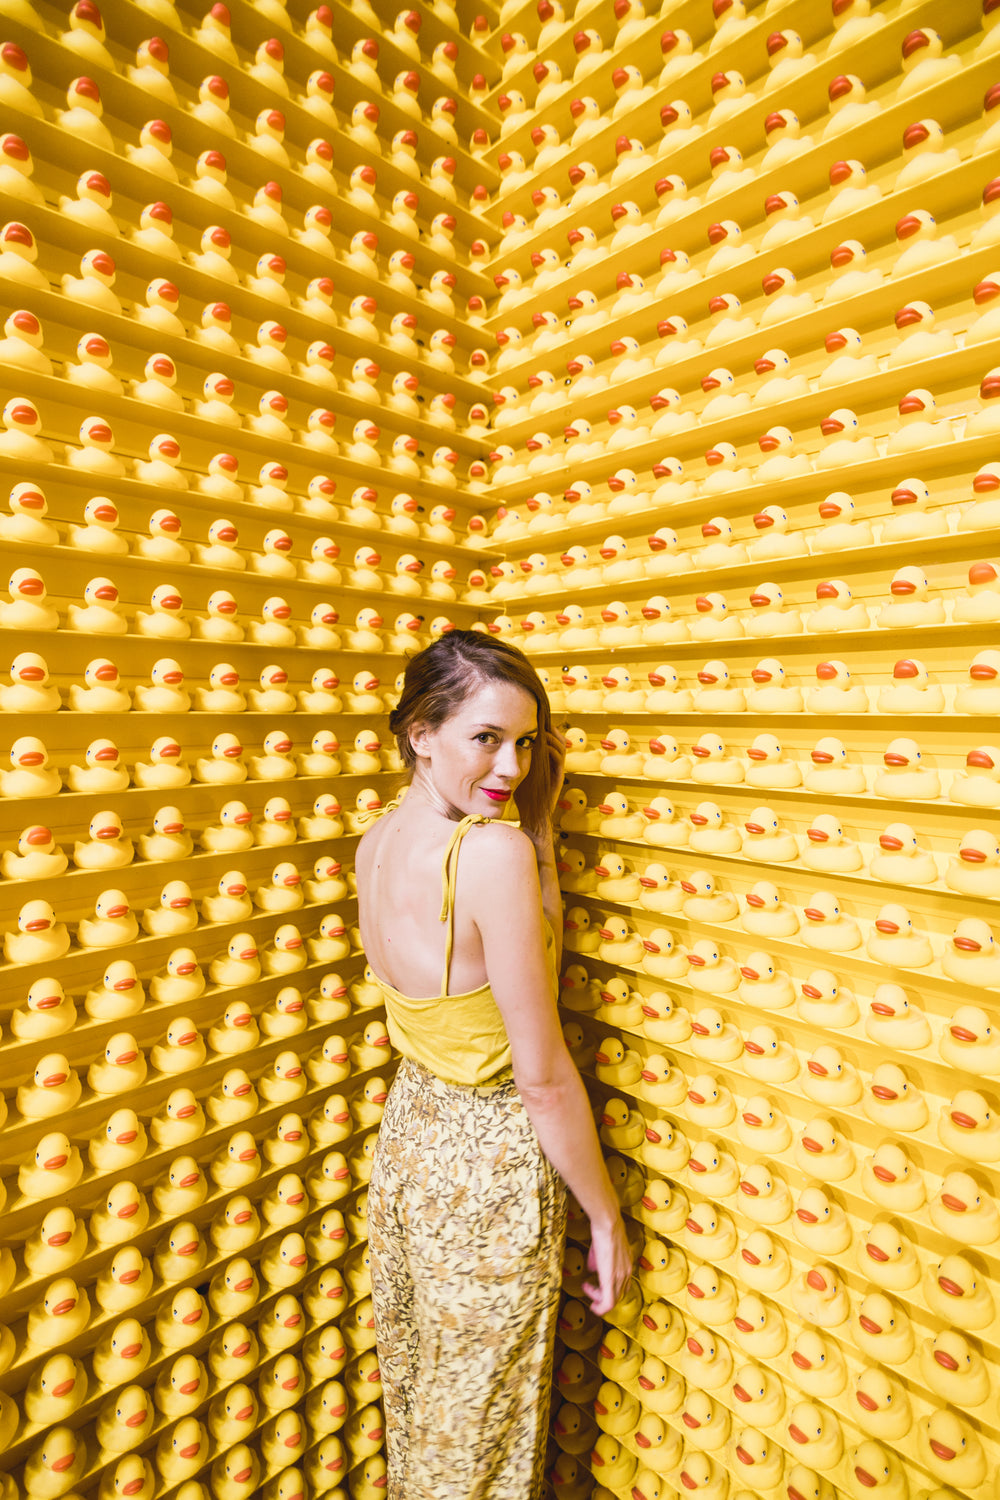 model posing coyly with hundreds of rubber ducks